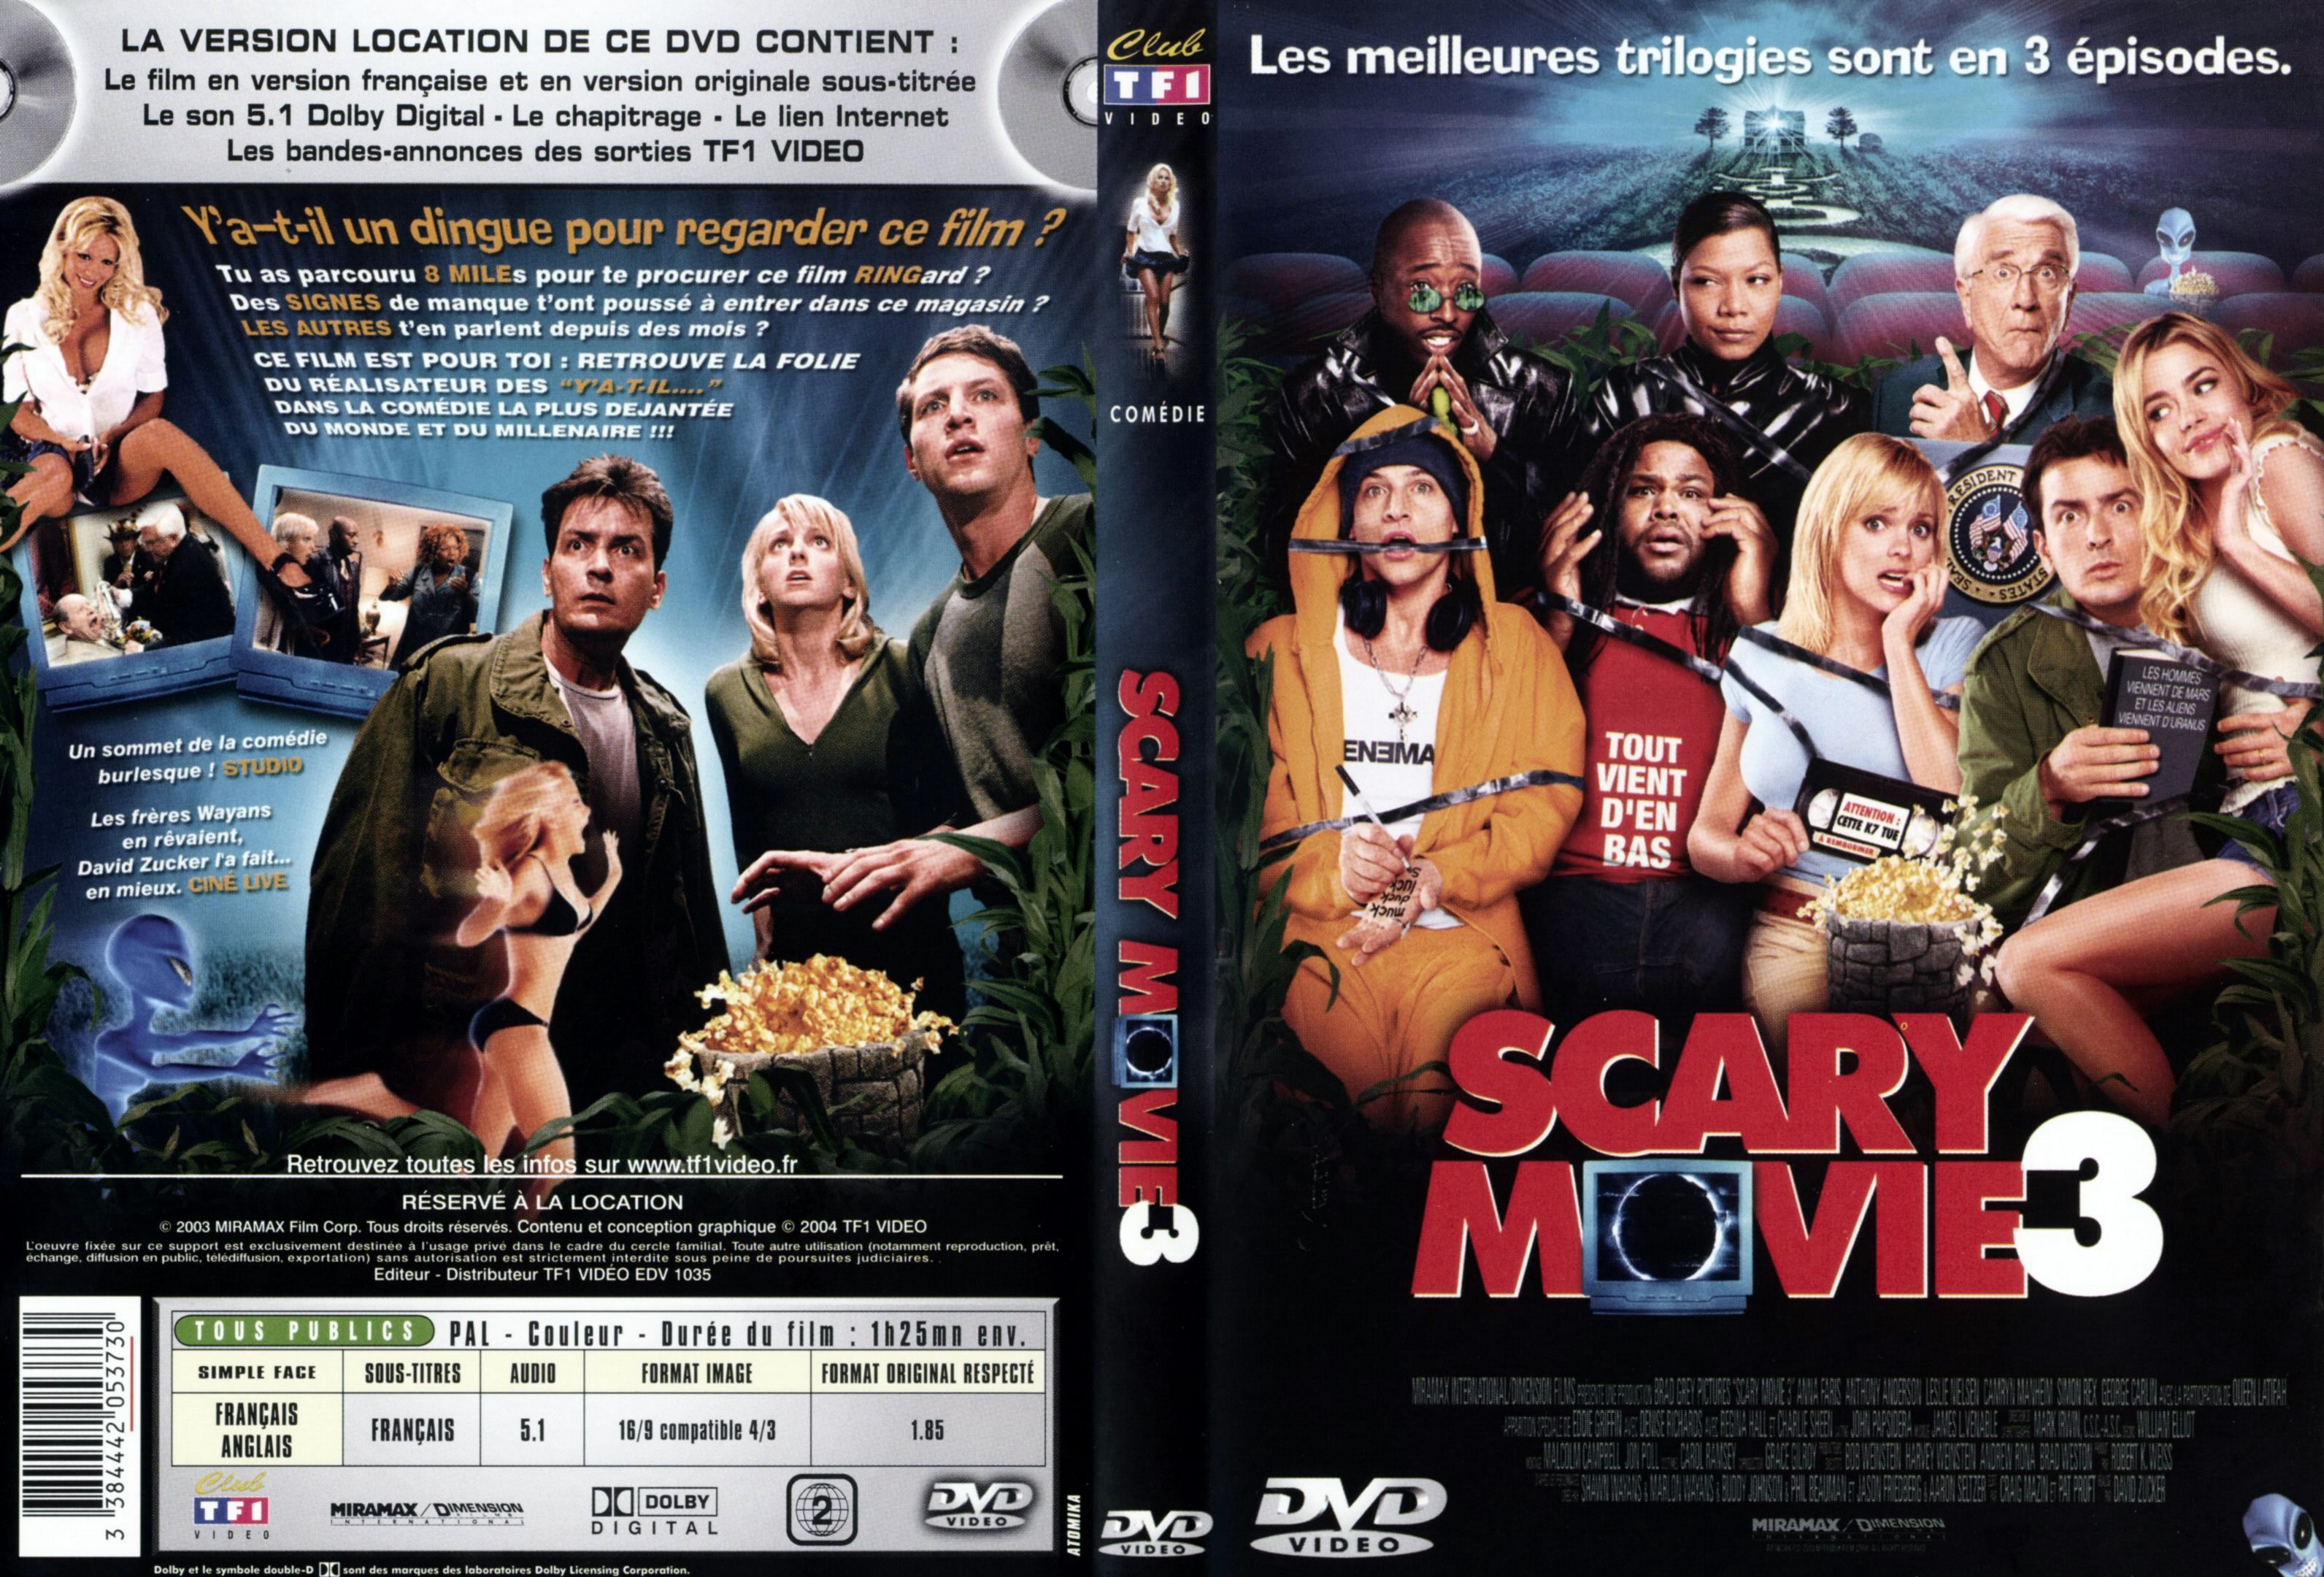 Jaquette DVD Scary movie 3